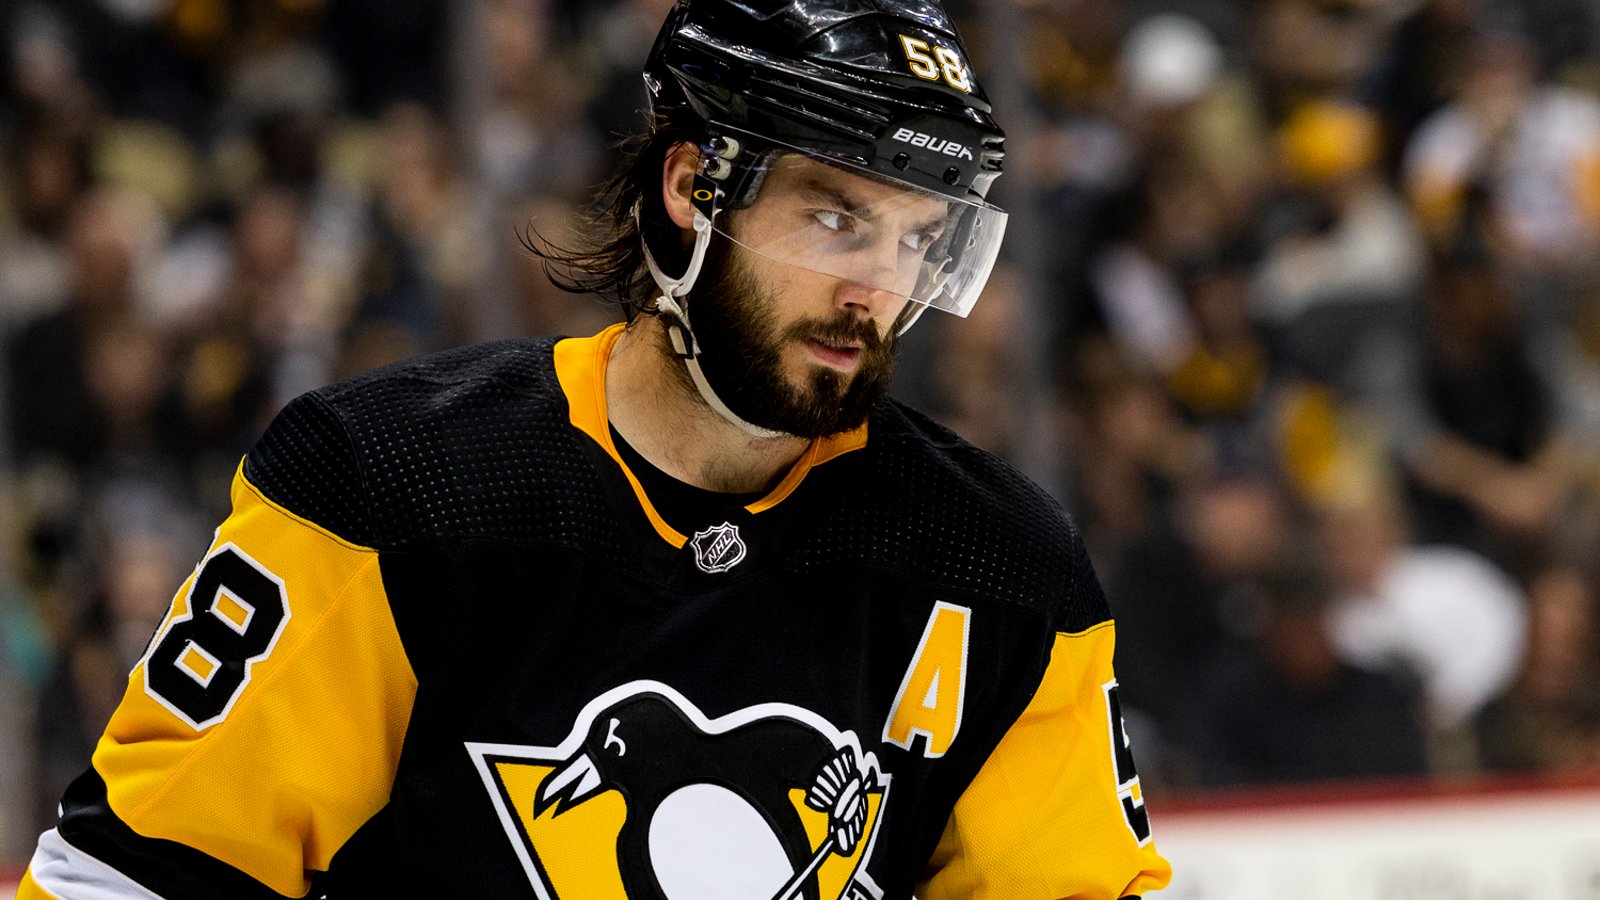 Huge blow to the Penguins as Letang is out long-term! 